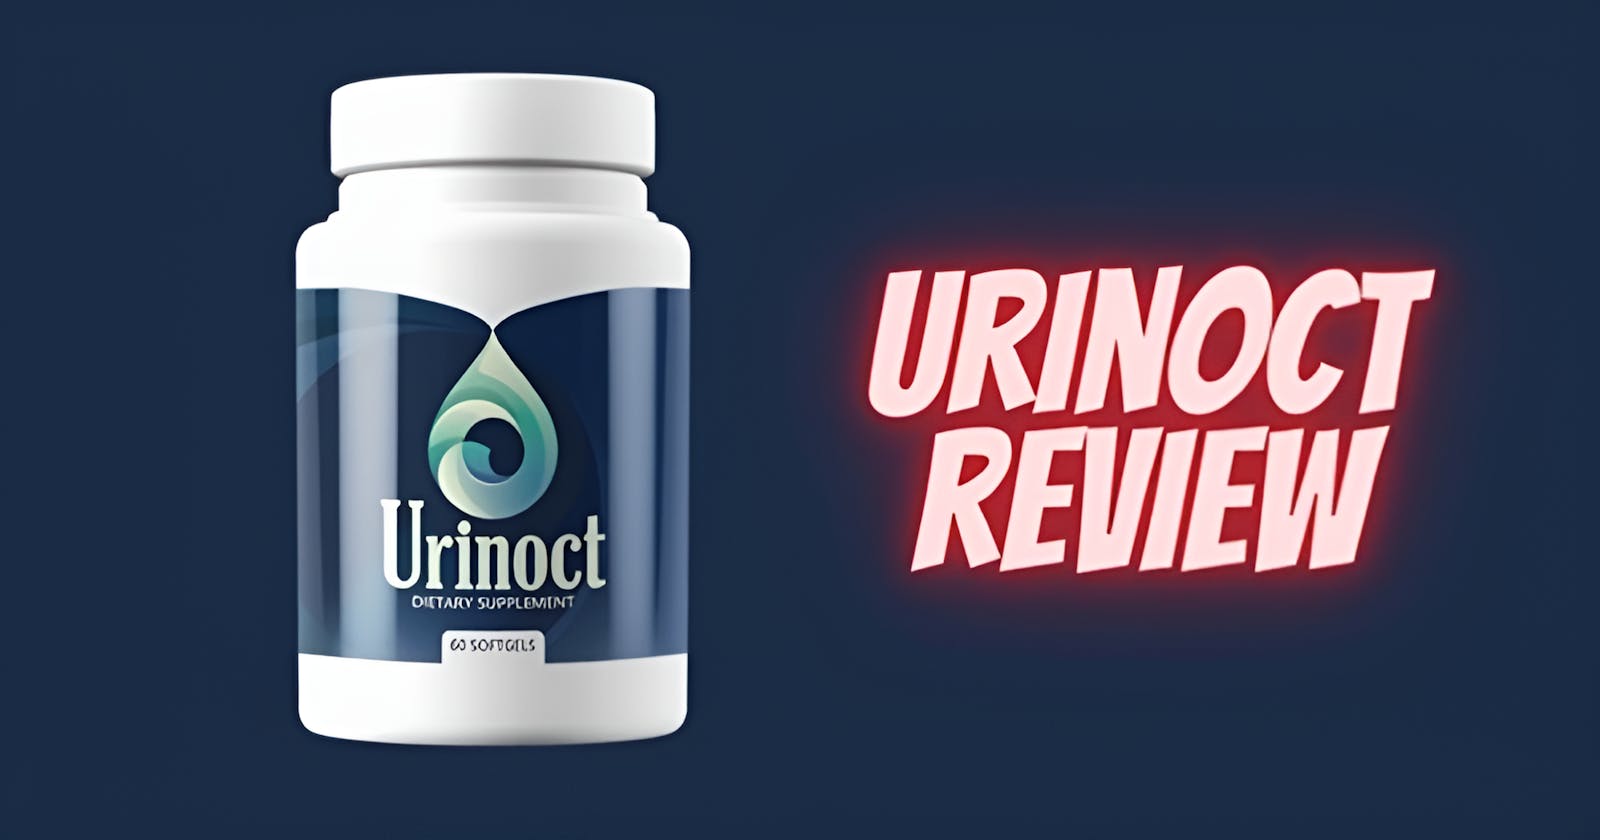 Urinoct Reviews (Beware Lie Exposed!!) Don’t Buy Prostate Health Supplement Without Reading